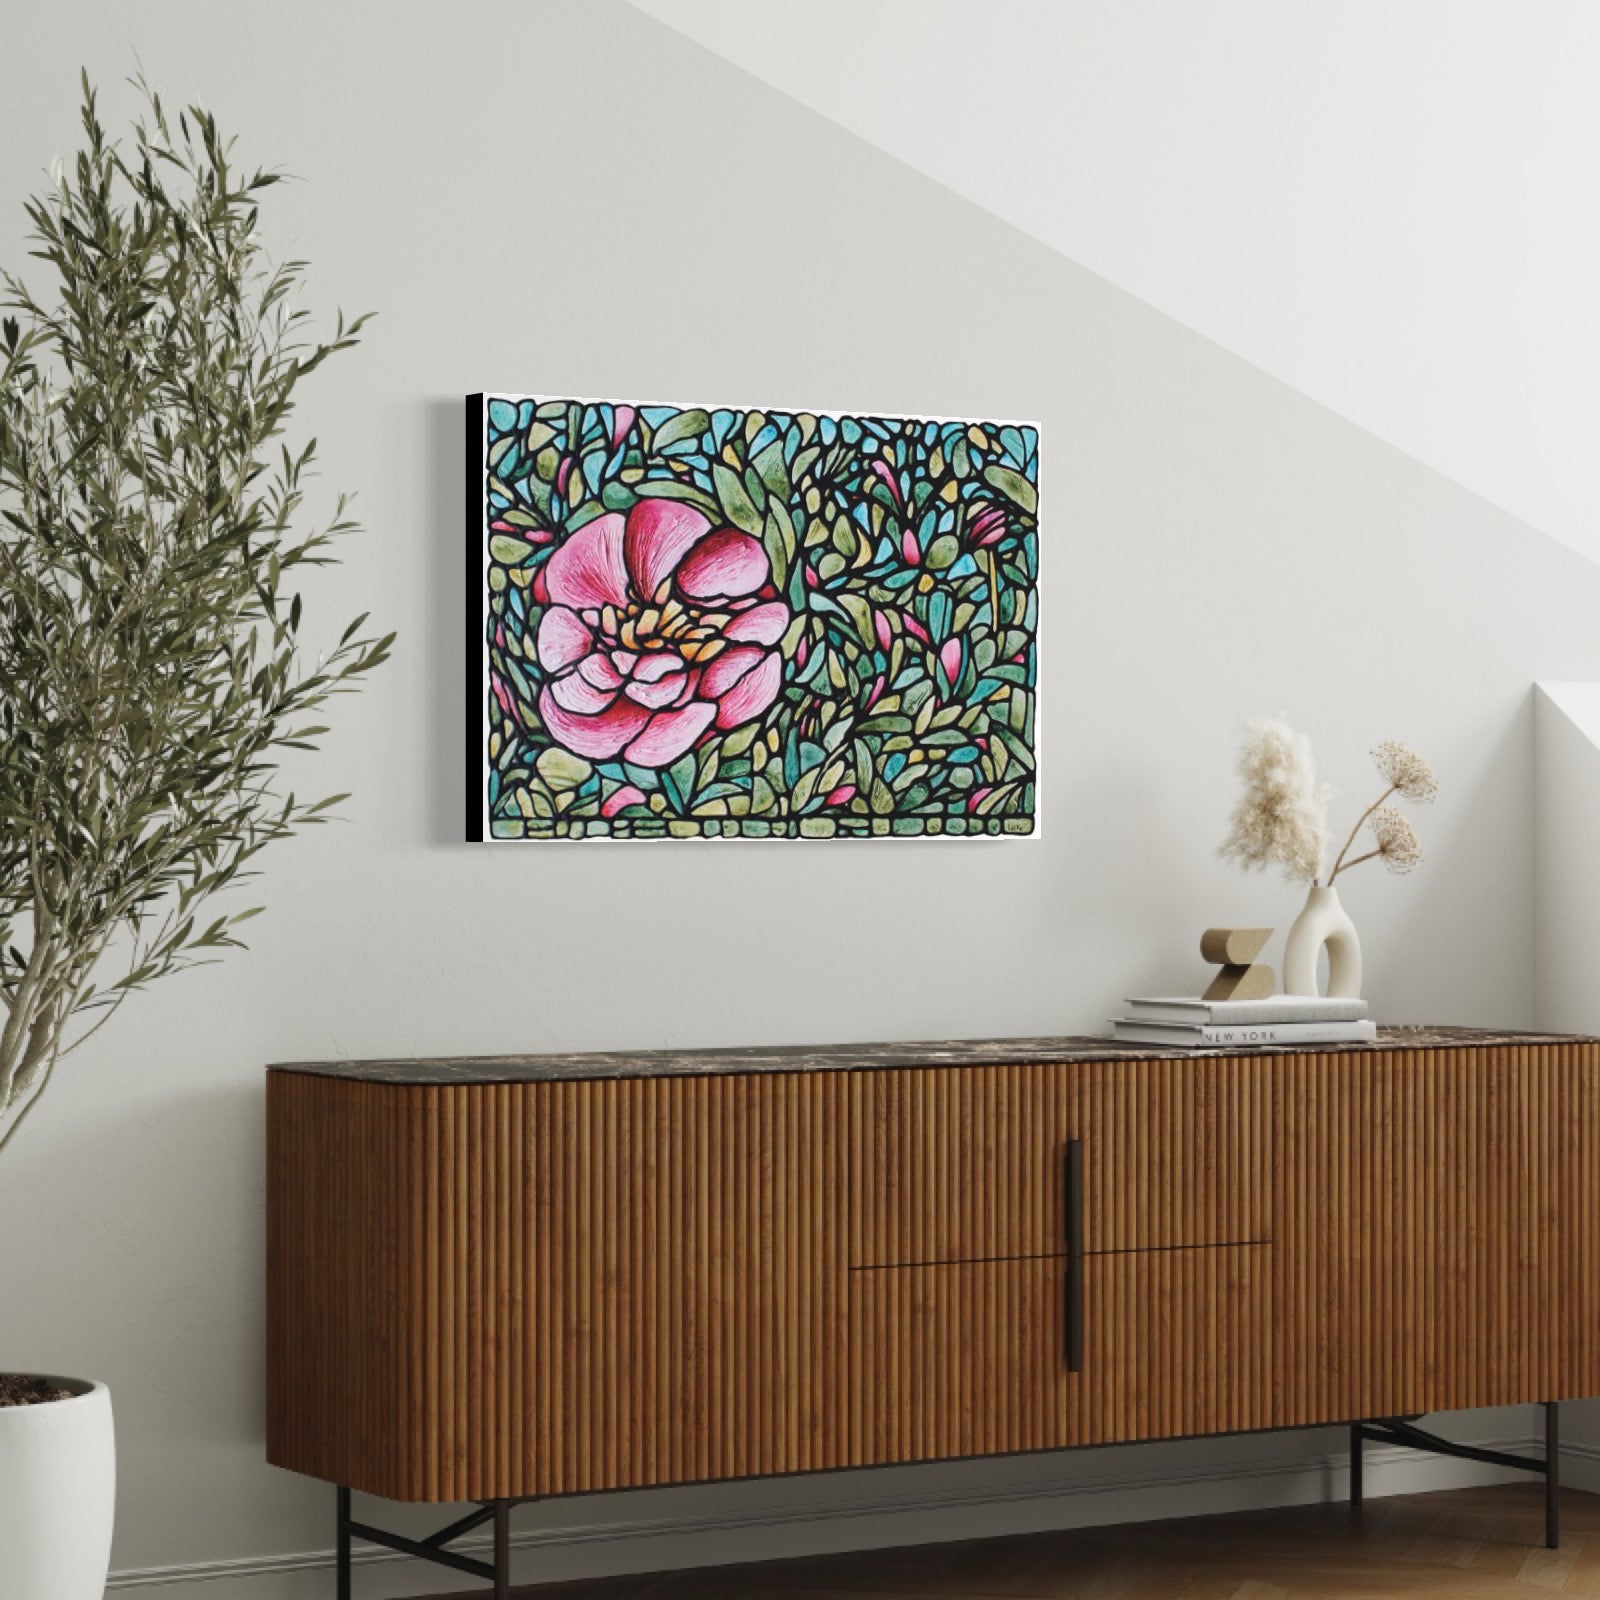 Peony Flower Original Painting 30 x 20 inches